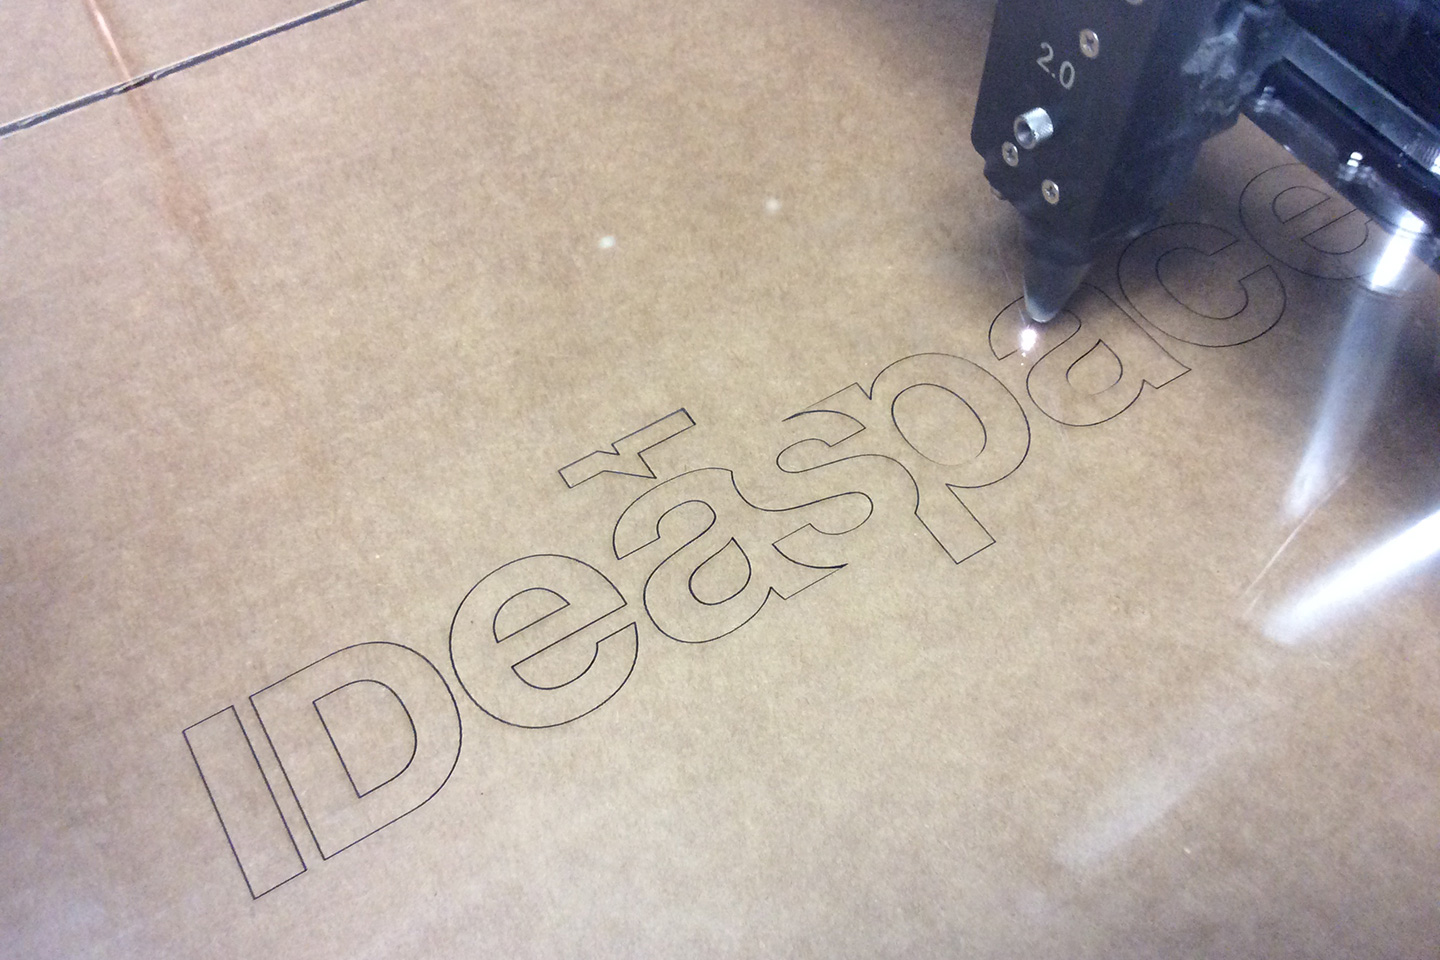 Laser cutter cutting the IDeaspace logotype out of clear acrylic